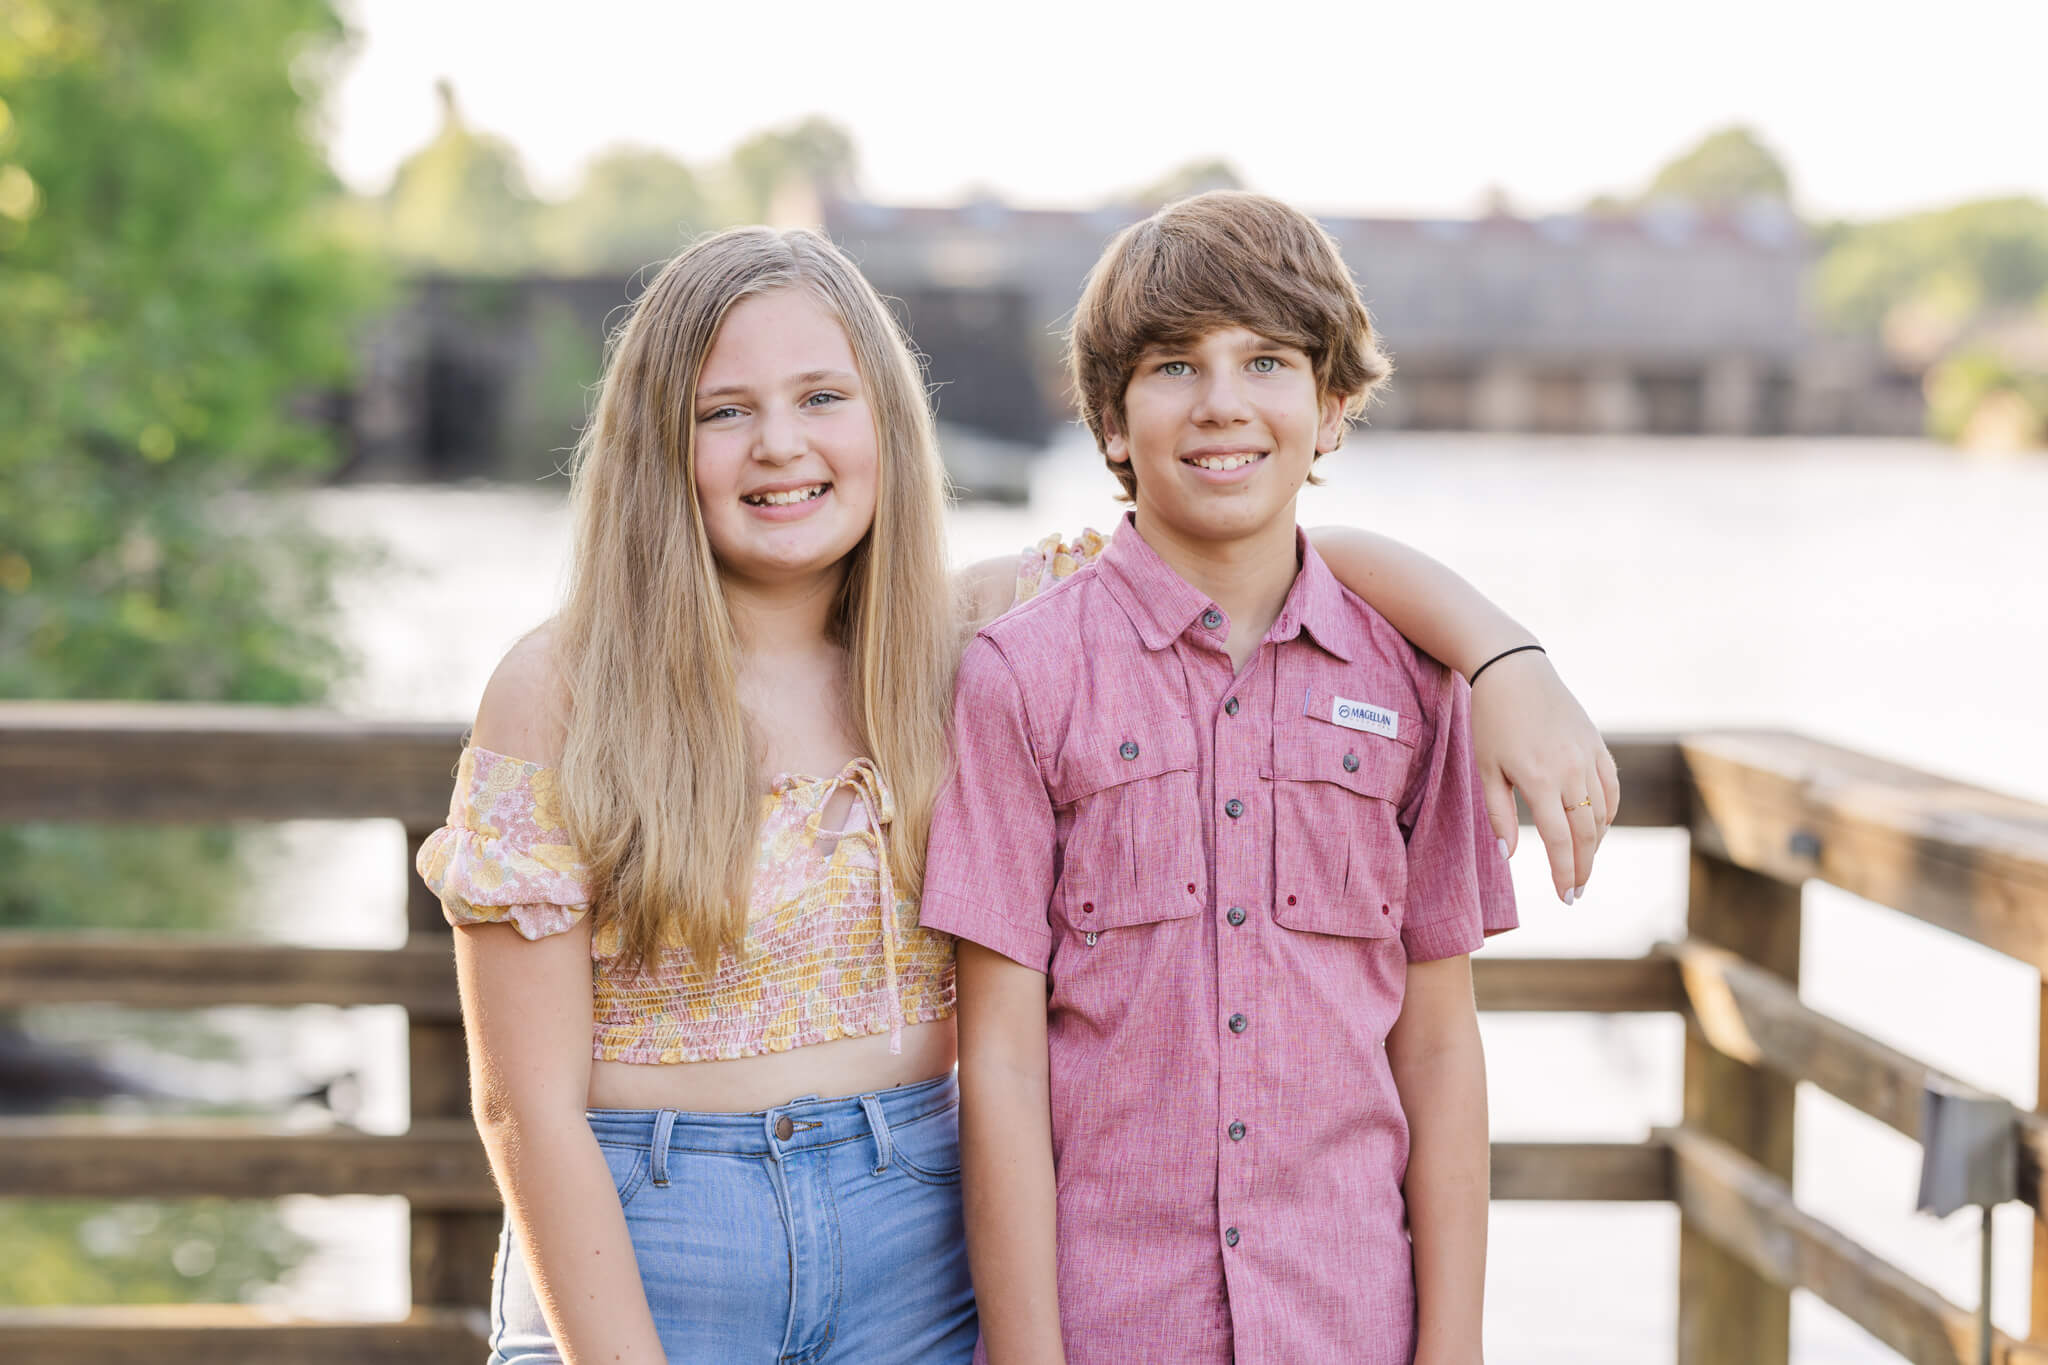 Brother and sister share a laugh during their sibling session at the savannah rapids.

private schools in augusta ga